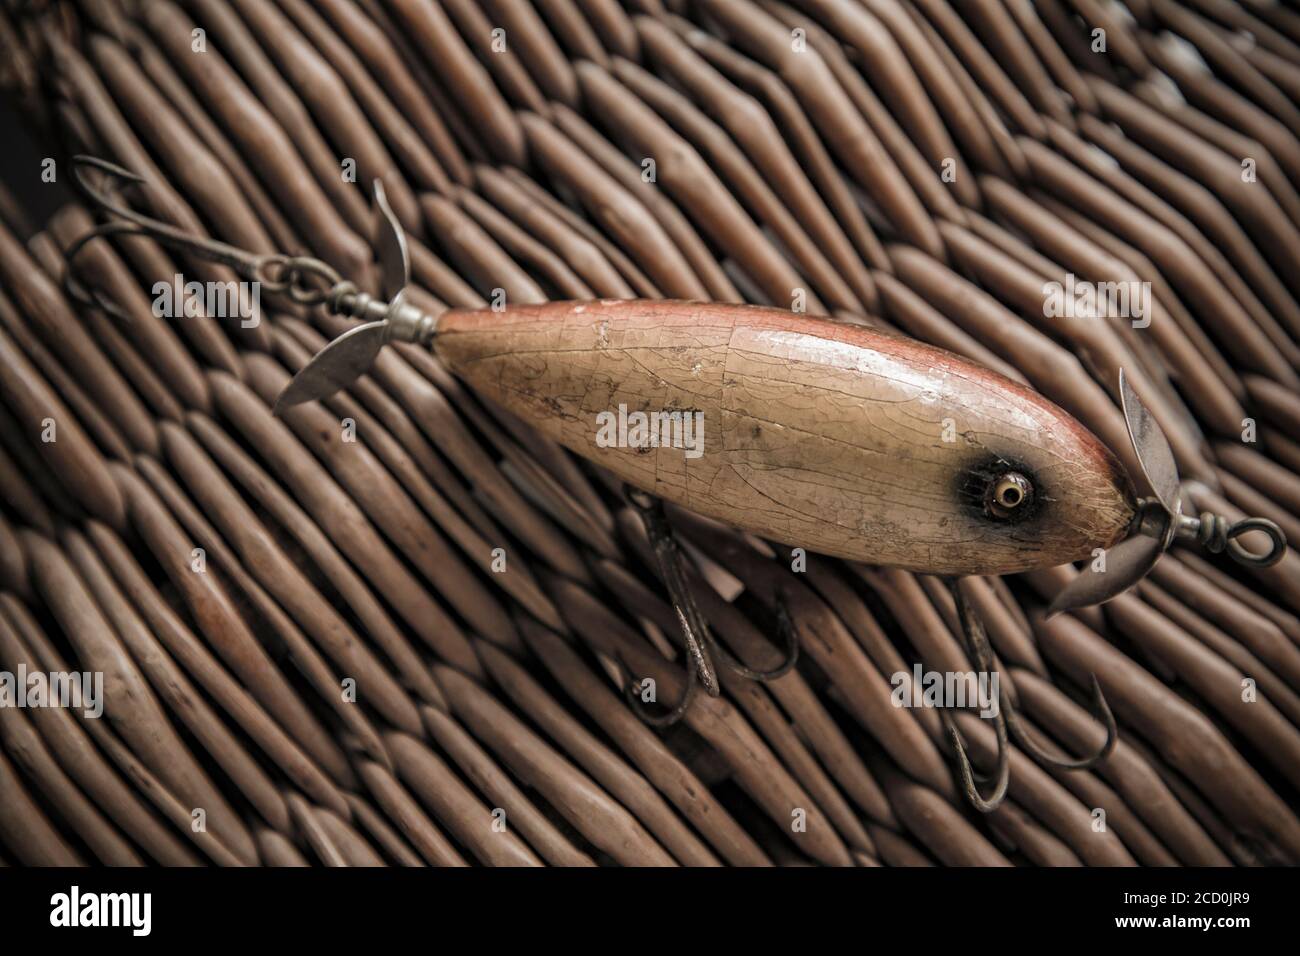 An old South Bend fishing lure, or plug, designed for catching predatory fish photographed against the whicker lid of an old tackle box. From a collec Stock Photo